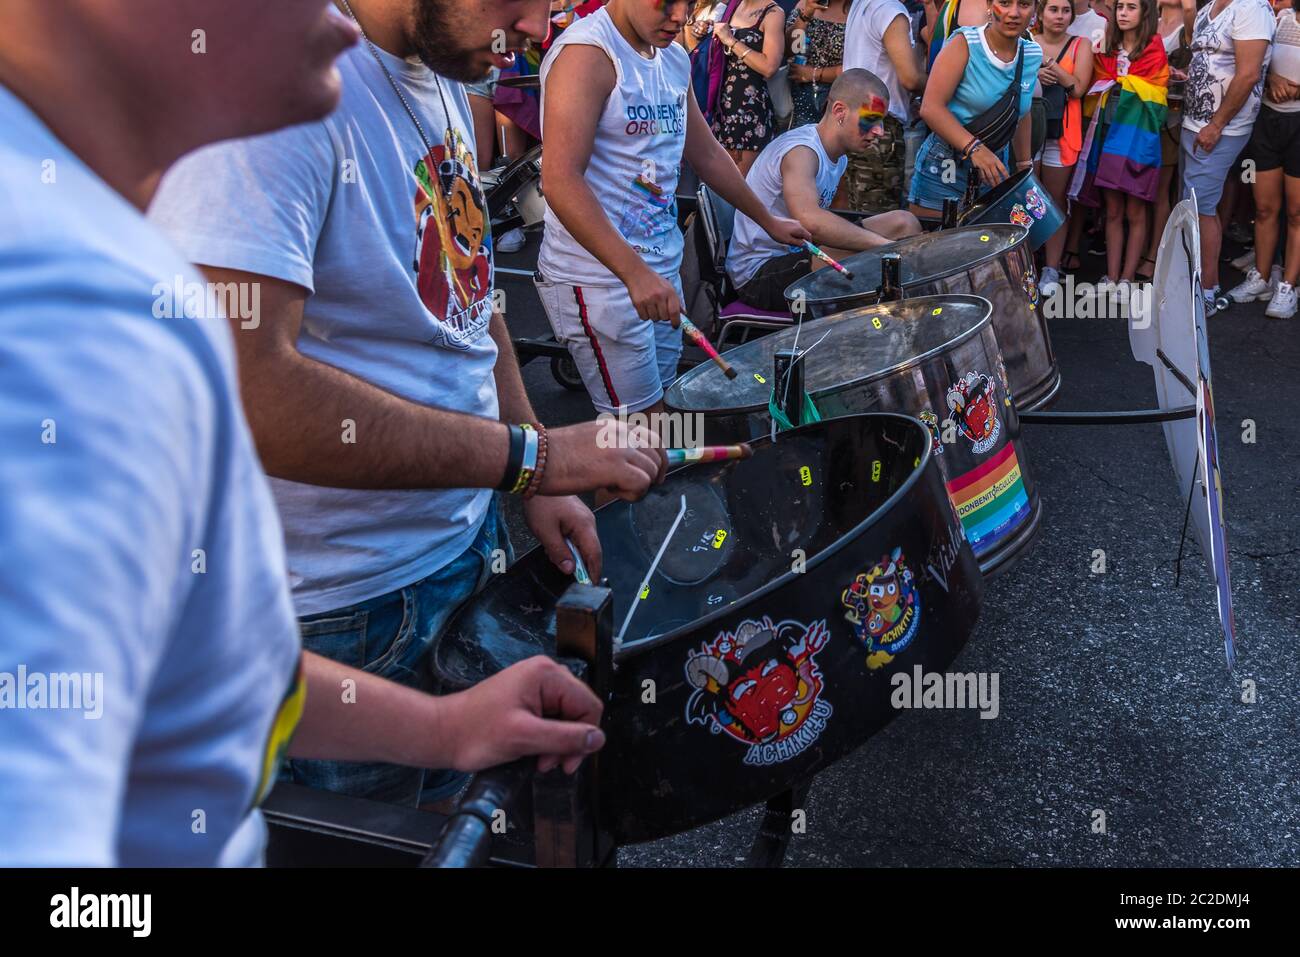 Madrid, Spain - July 06, 2019: in Madrid, Gay pride day celebrations. A group of people drumming Stock Photo